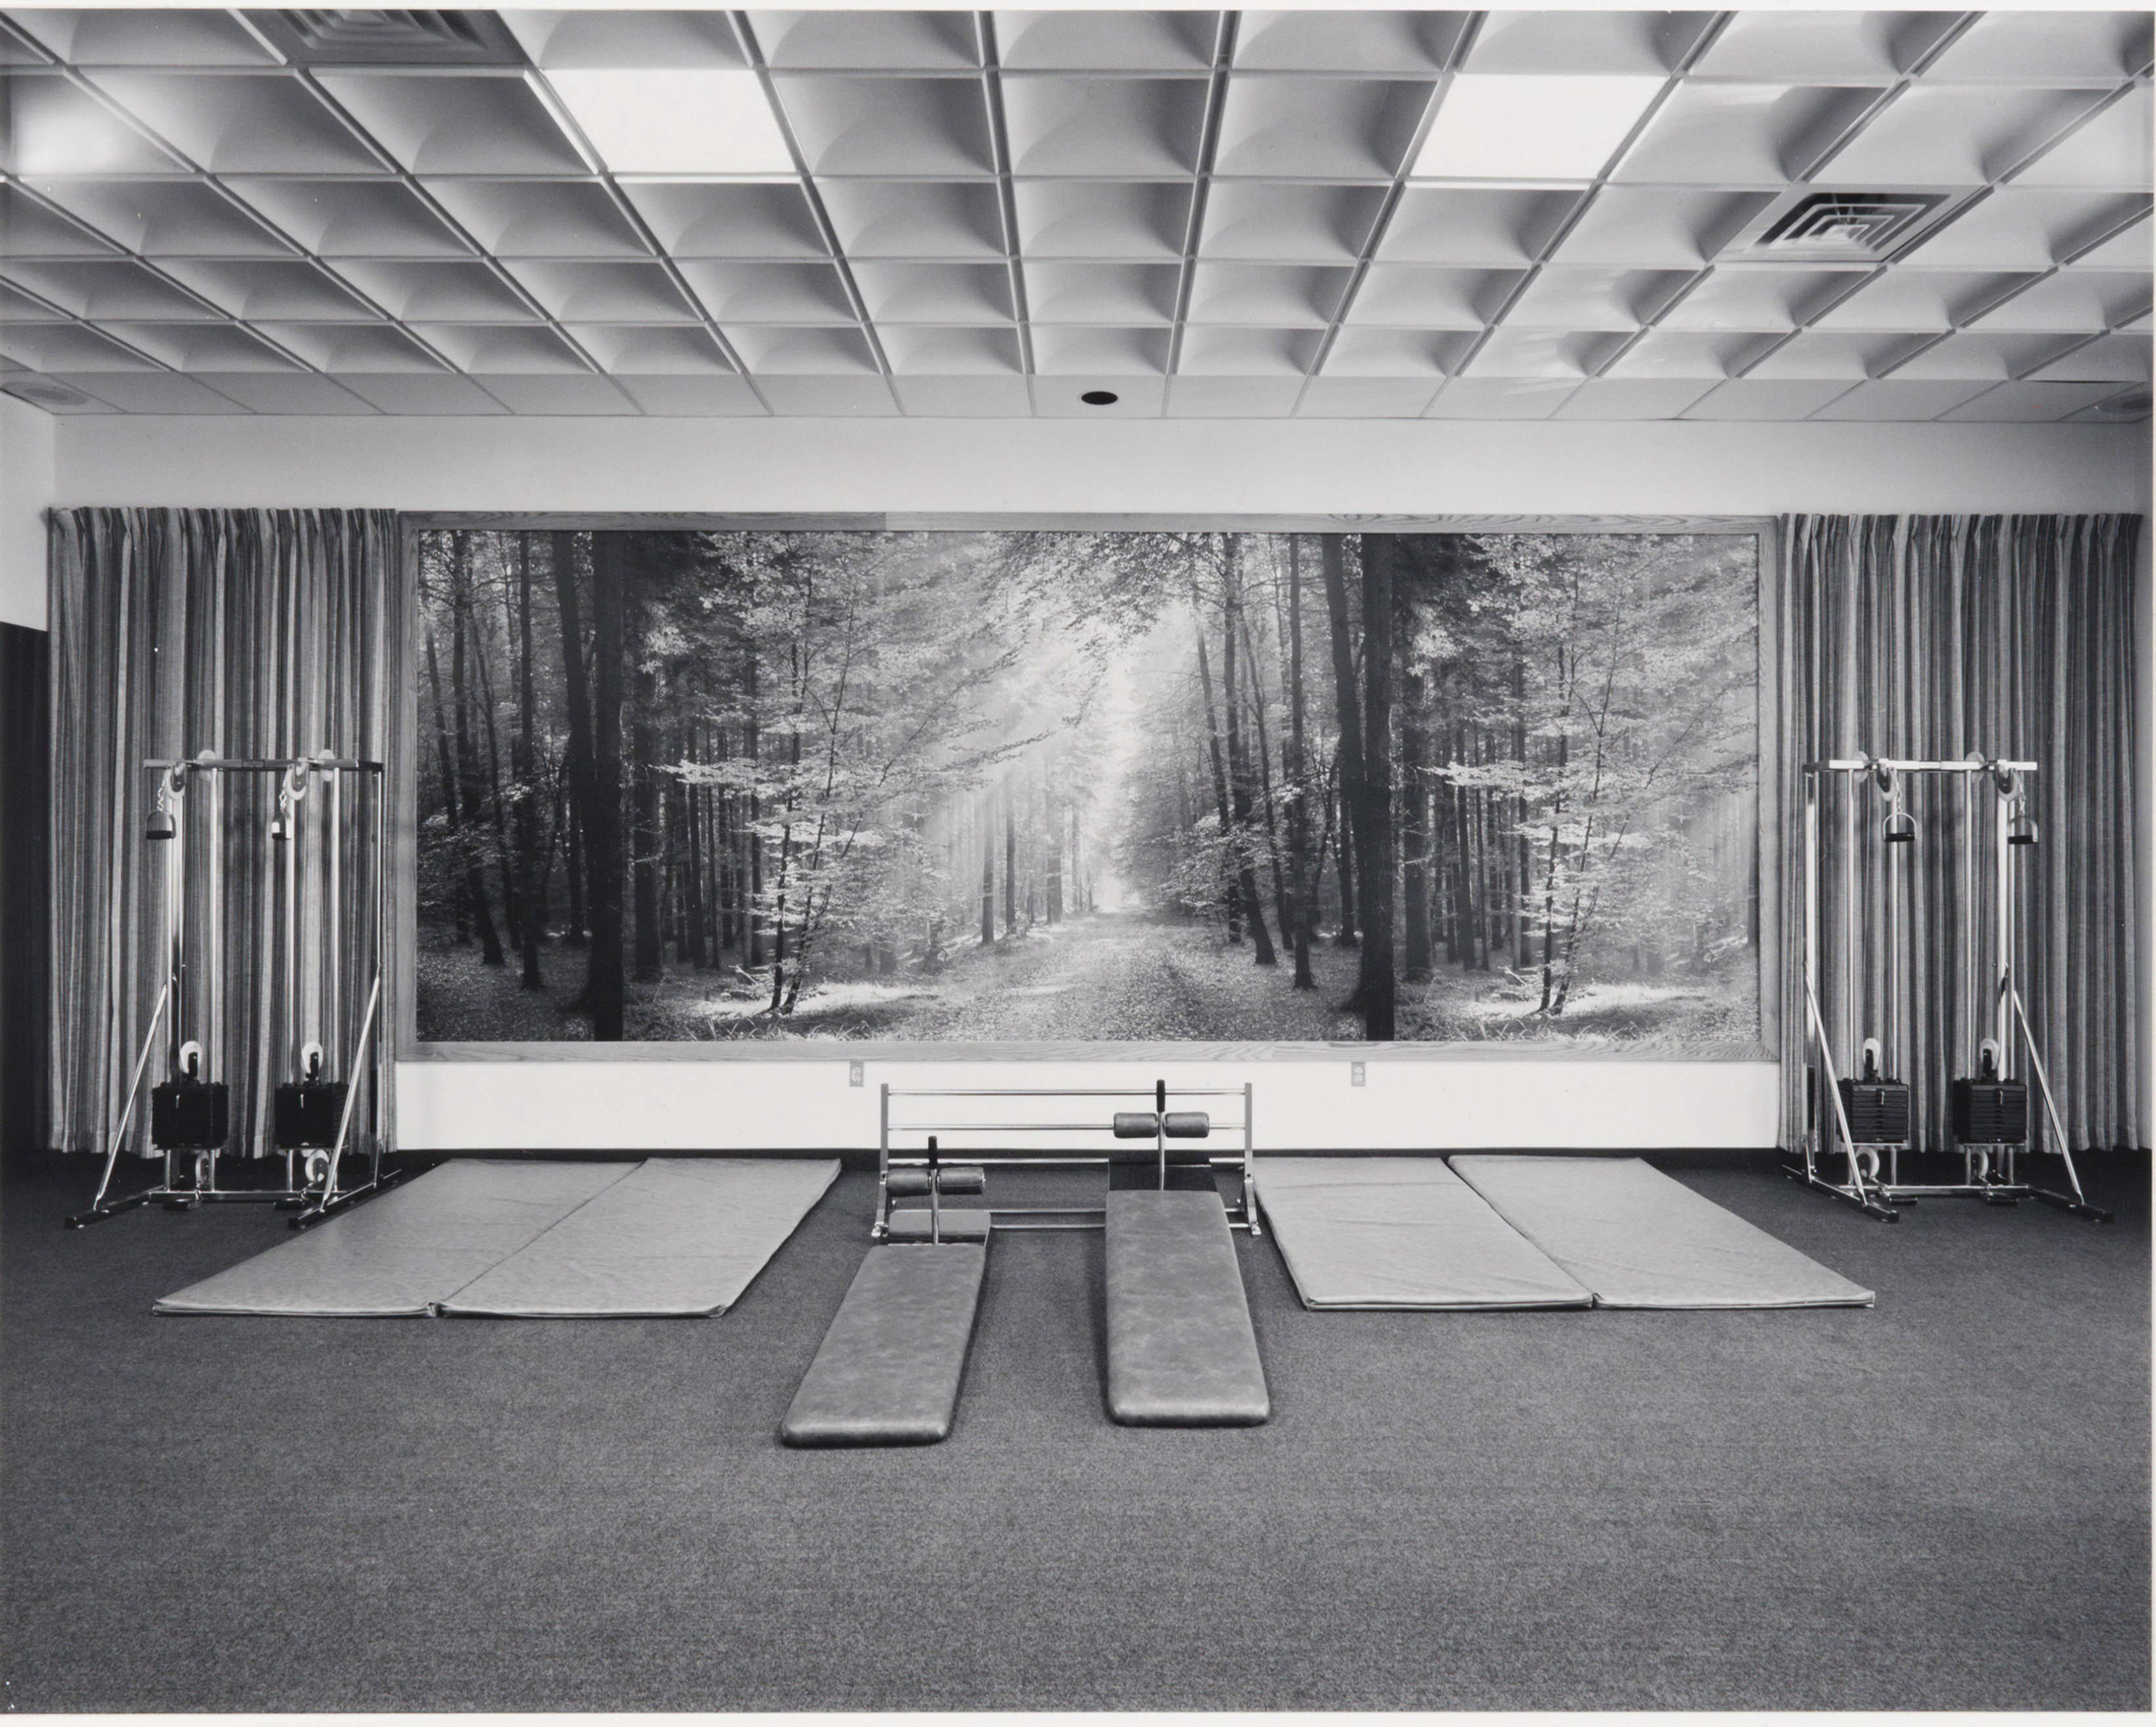 Lynne Cohen photograph of a low-ceilinged fitness club interior with gym mats and weight racks arranged along a wall covered with a forest photomural